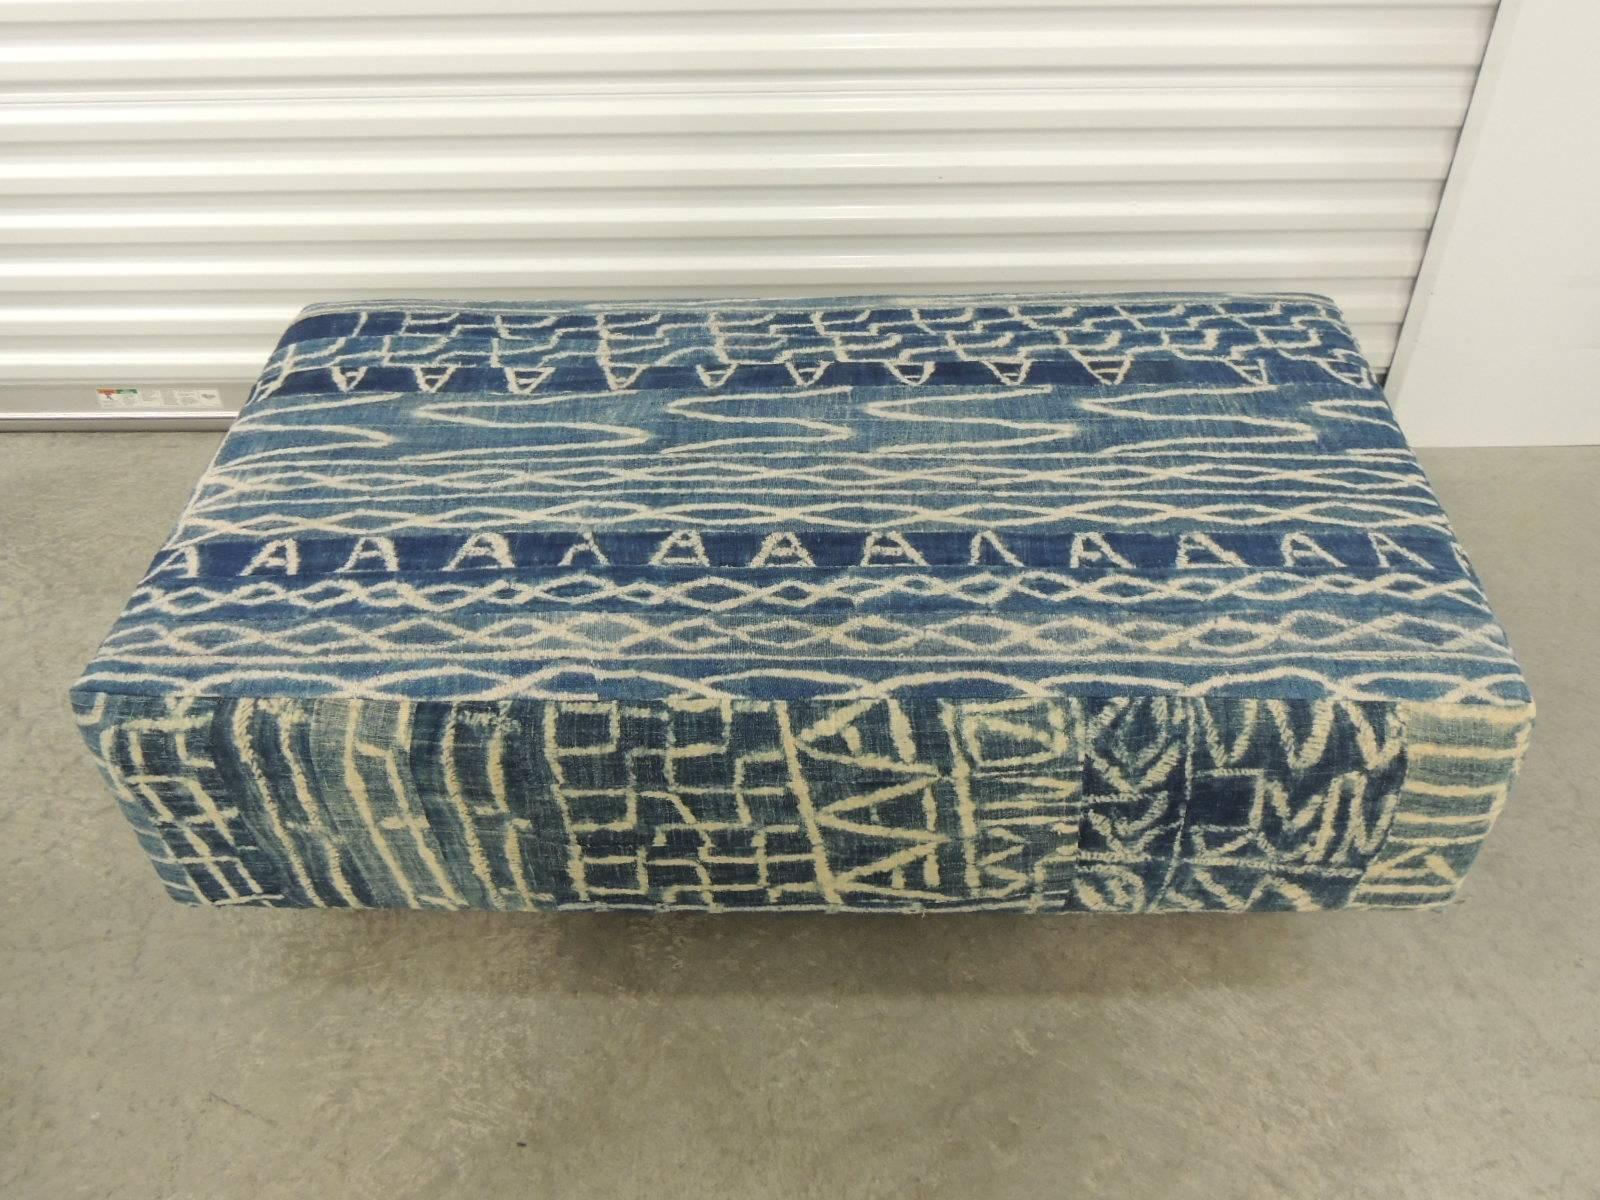 African blue and natural vintage Ndop textile upholstered ottoman textured finish.
African blue and natural vintage textile re-upholstered ottoman custom made and exclusively designed by us. Stripes of the African strip woven cotton were hand-sewn